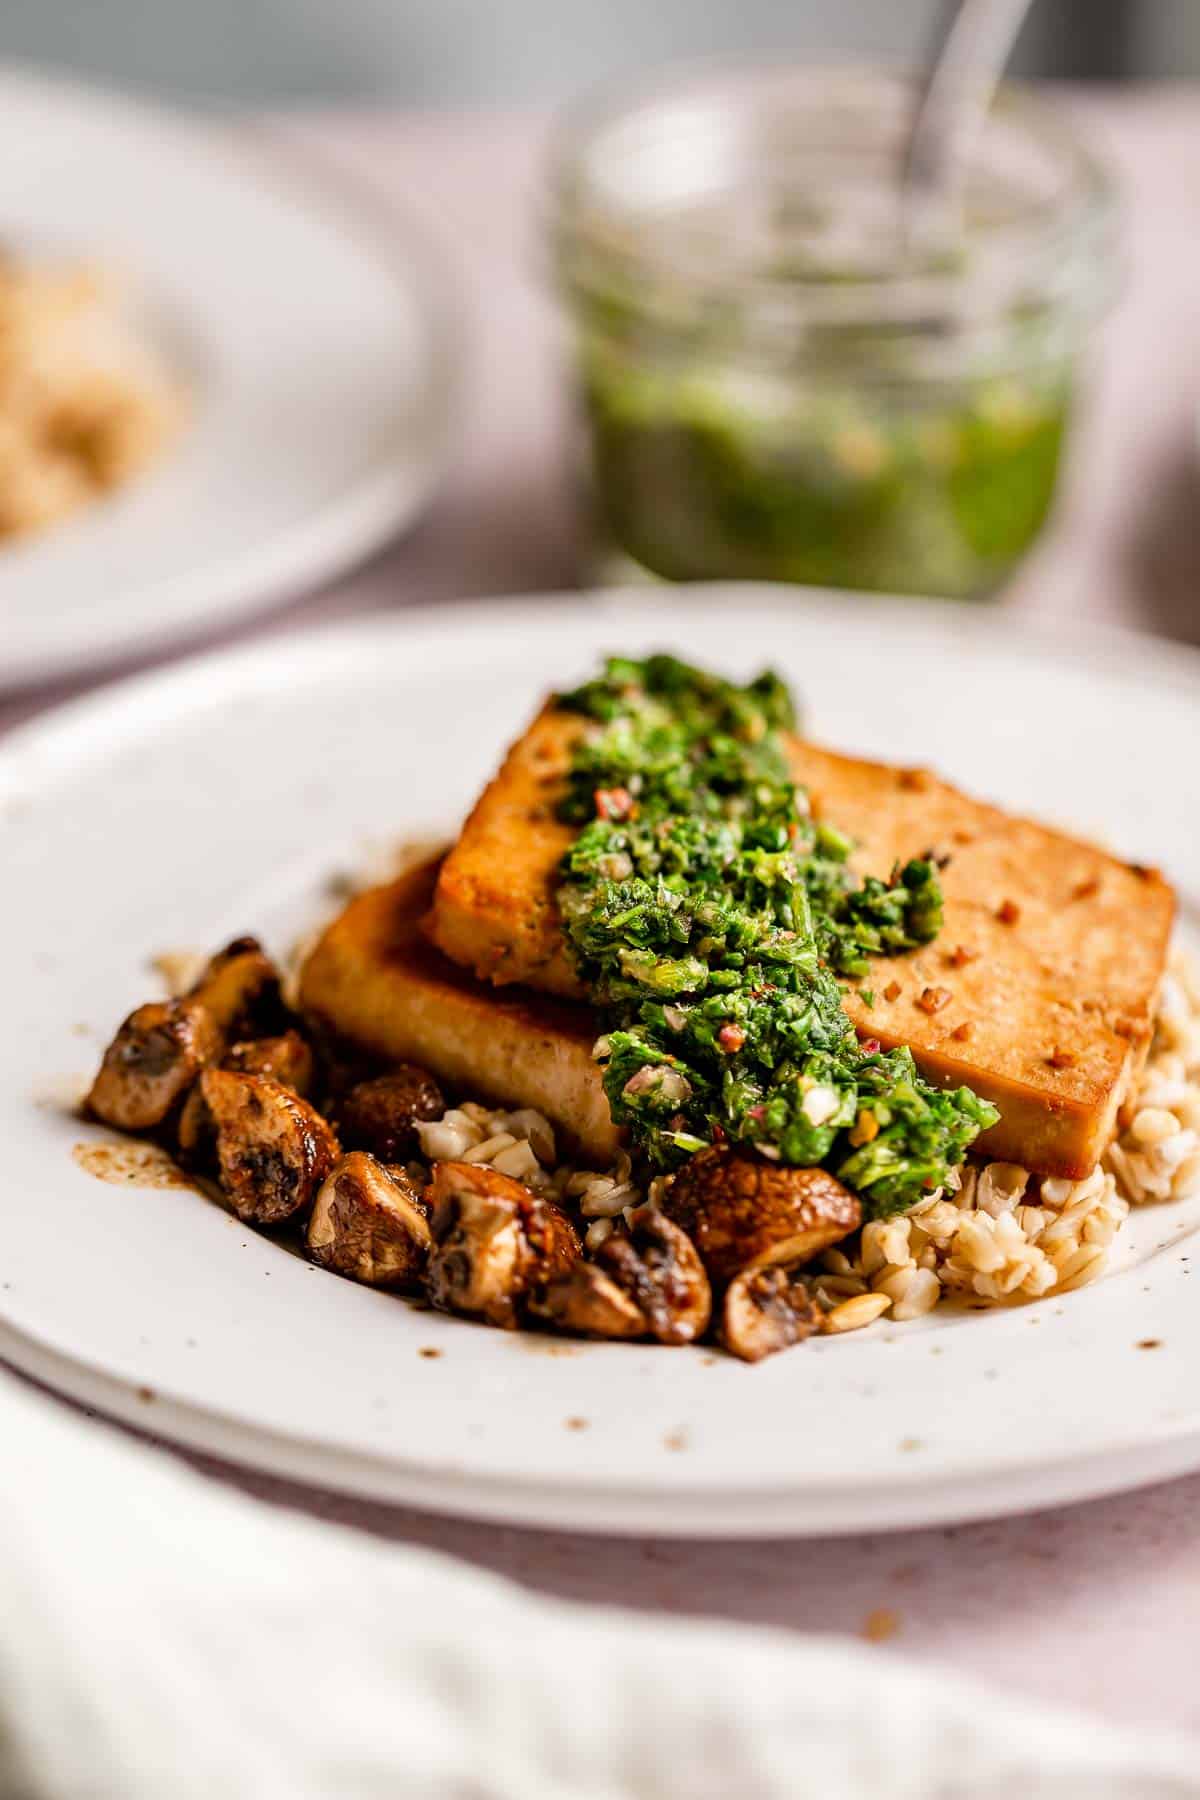 Tofu steaks over oat groats topped with chimichurri.